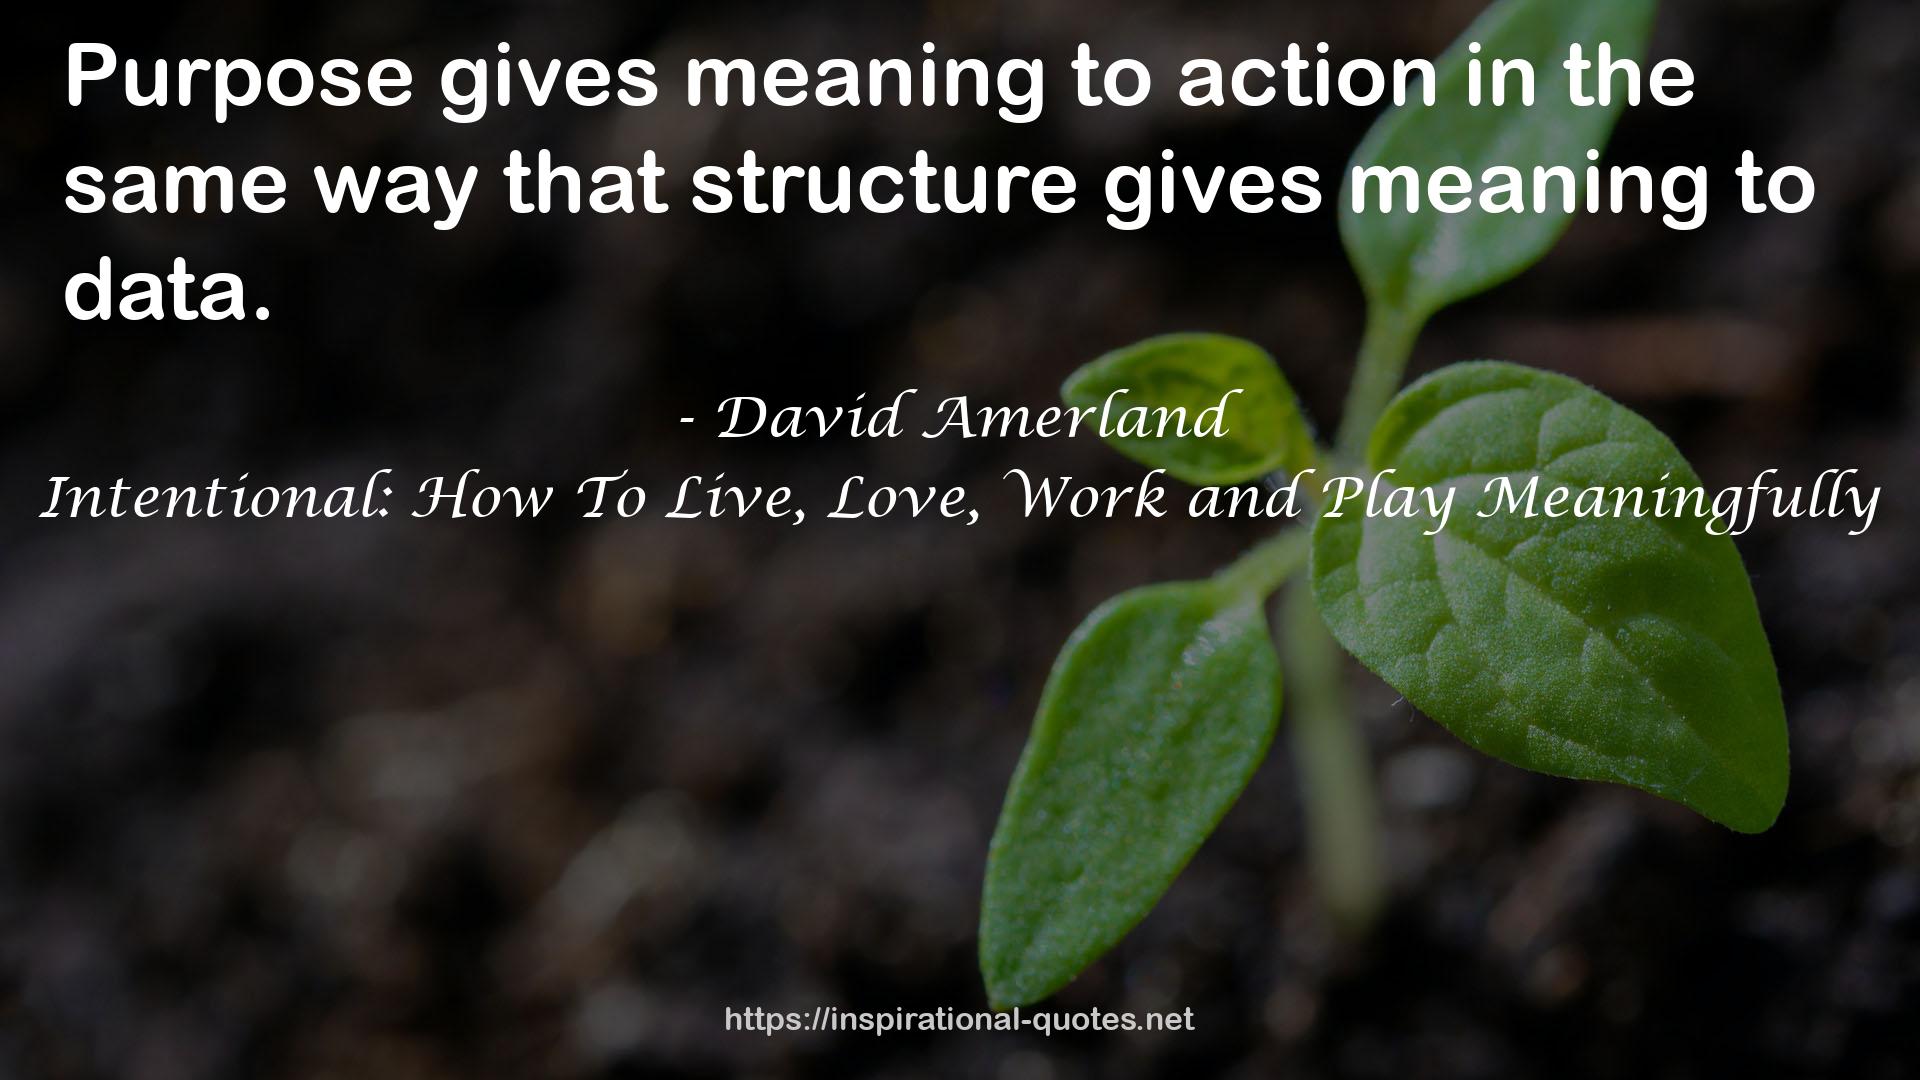 Intentional: How To Live, Love, Work and Play Meaningfully QUOTES